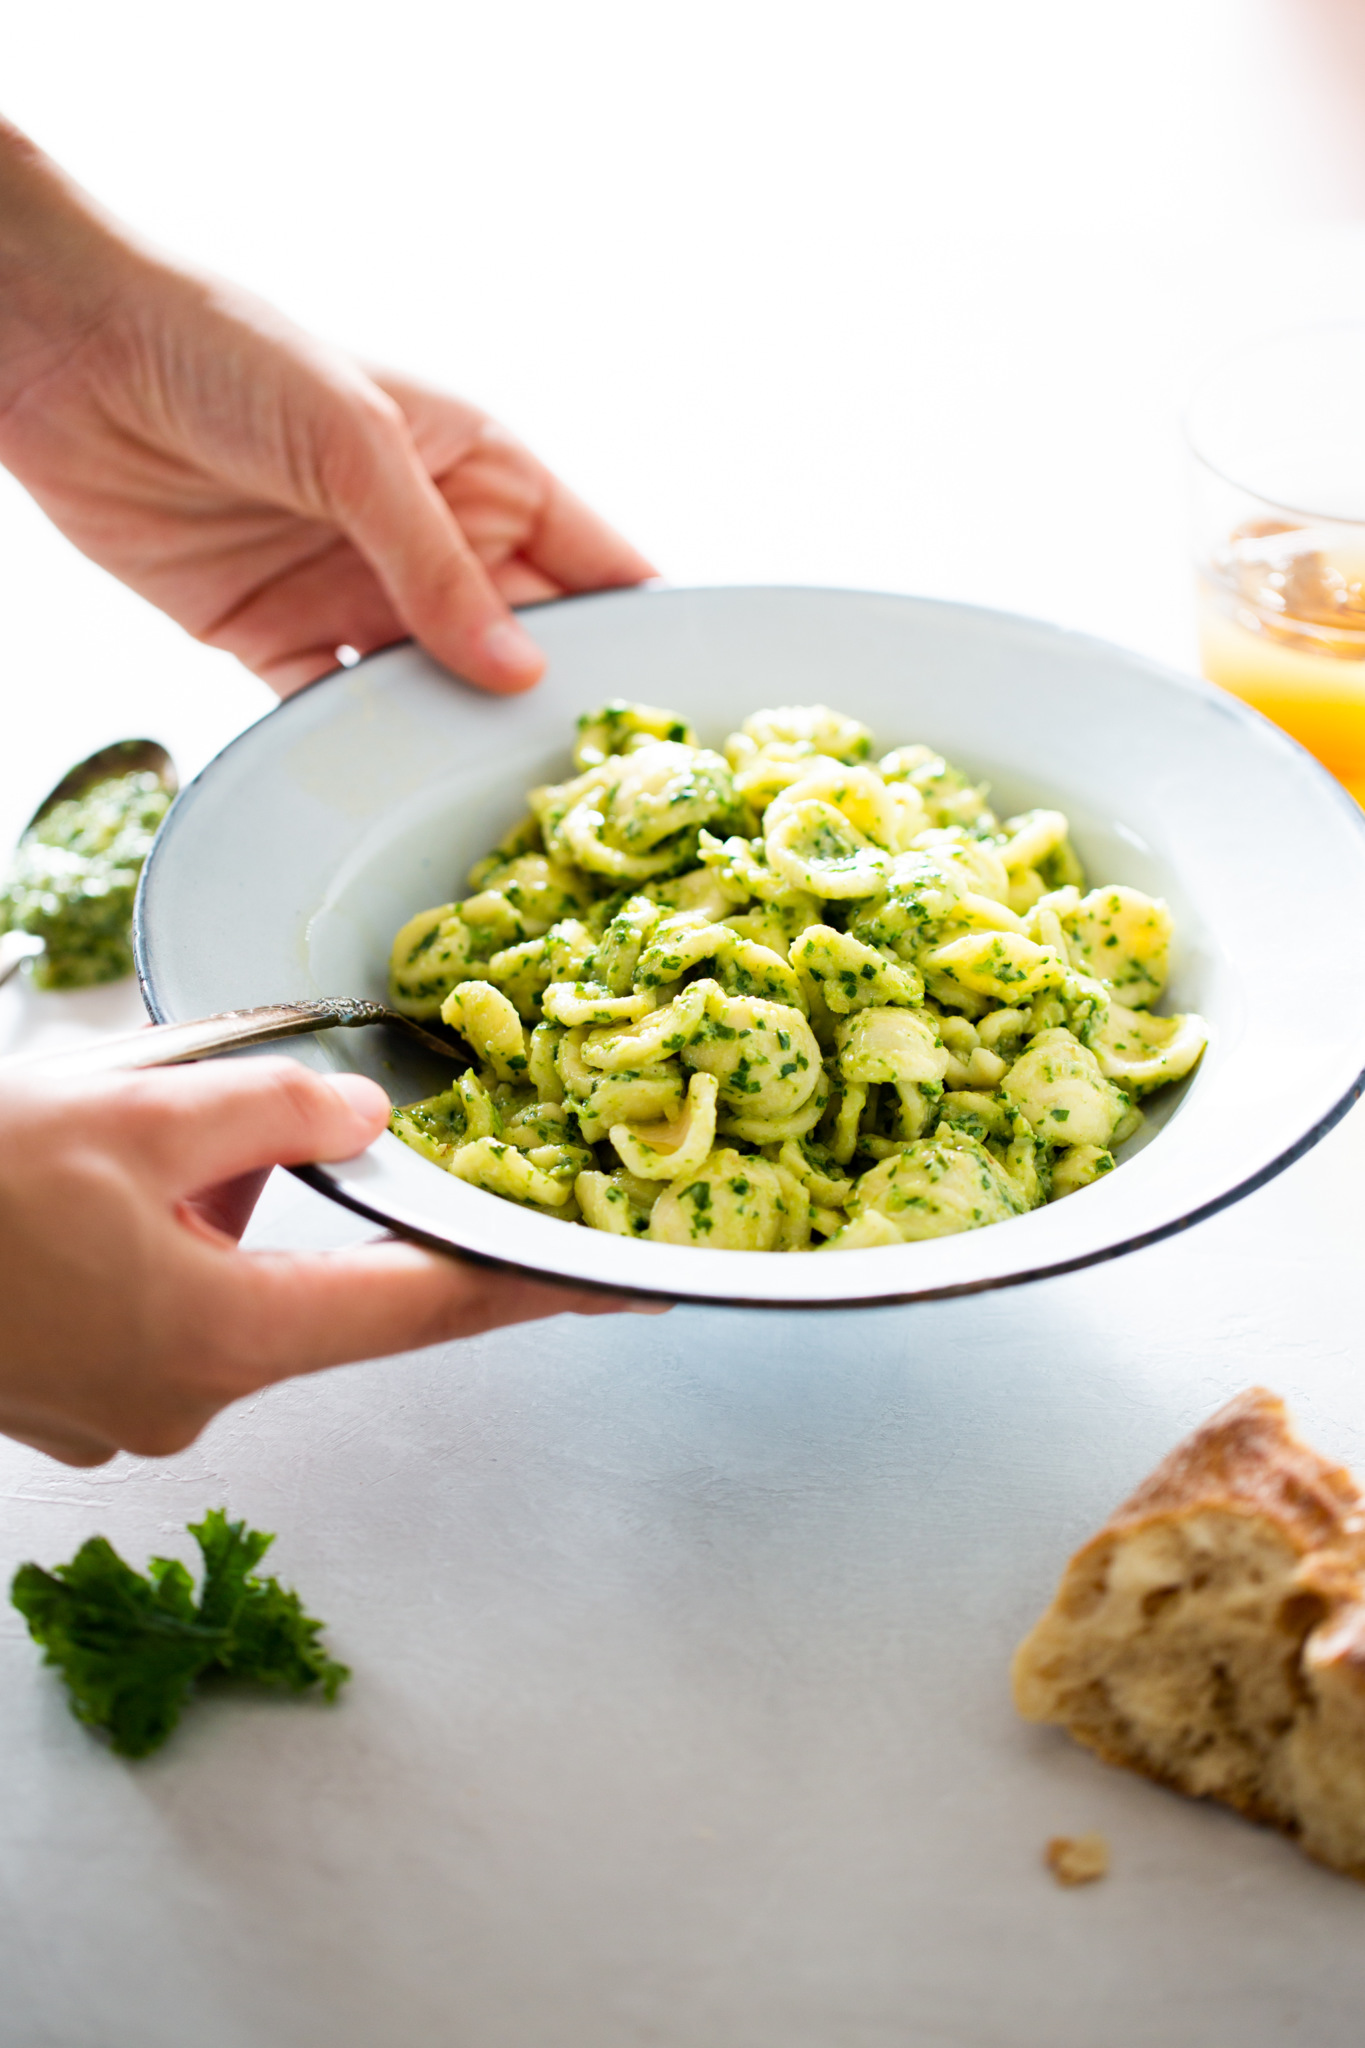 Kale pesto pasta in a dish being hold with two hands.